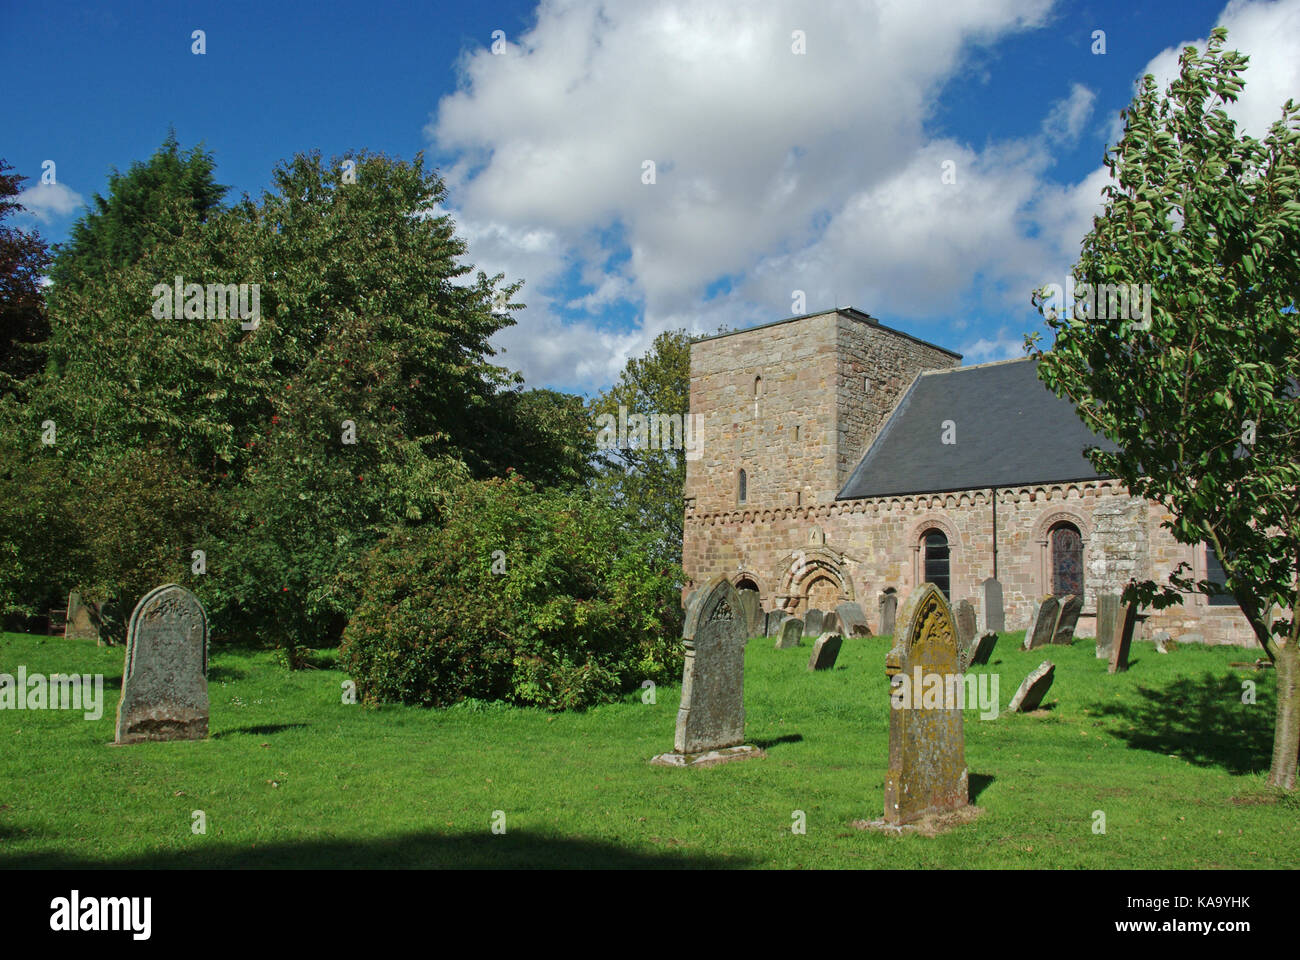 The church of St Anne in the village of Ancroft, Northumberland Stock Photo